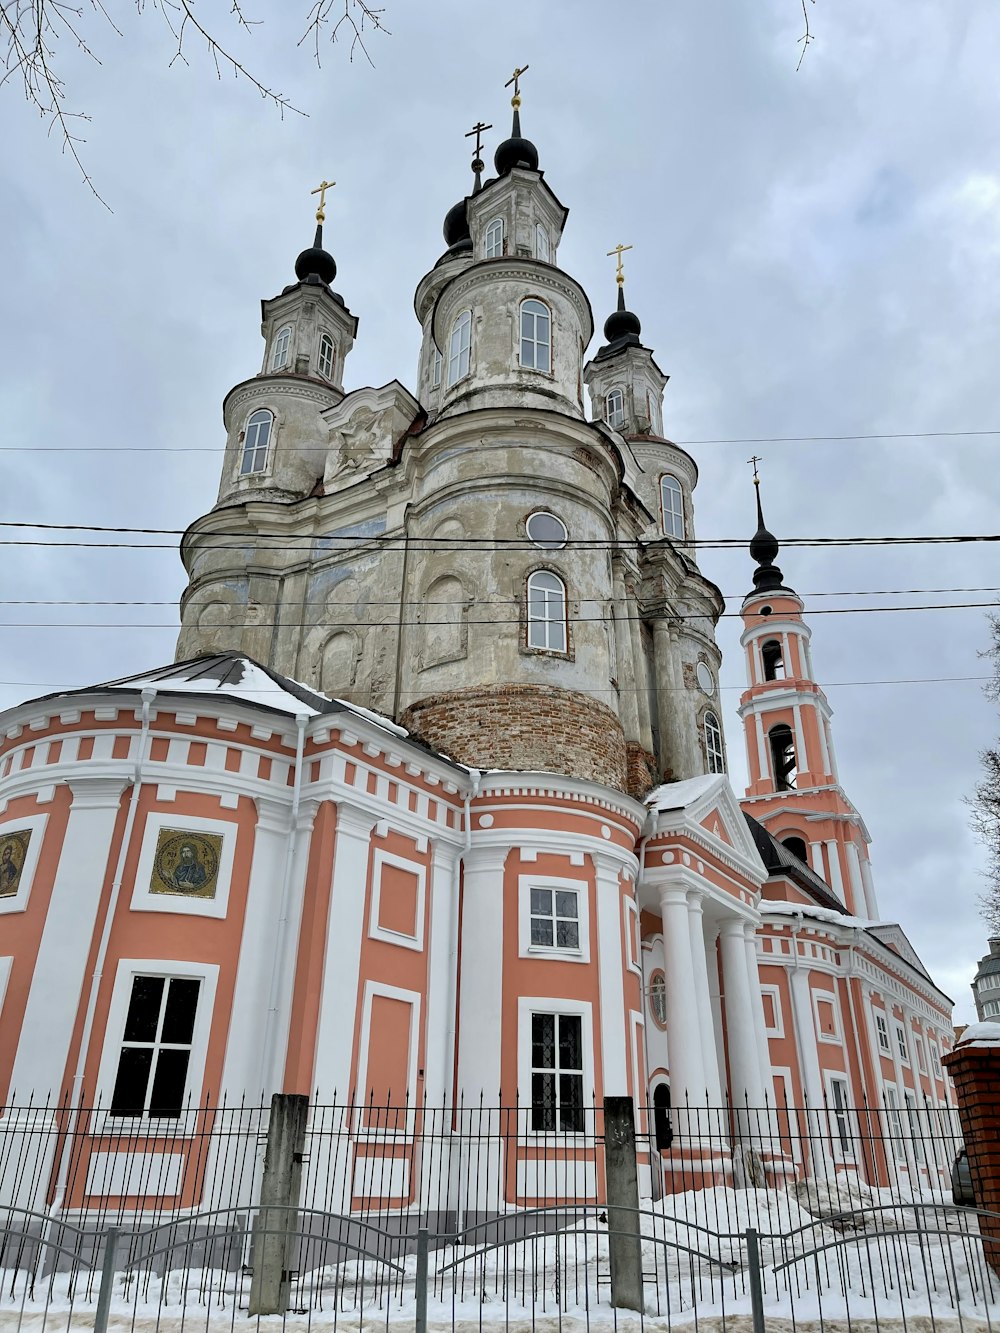 a large church with two towers on top of it